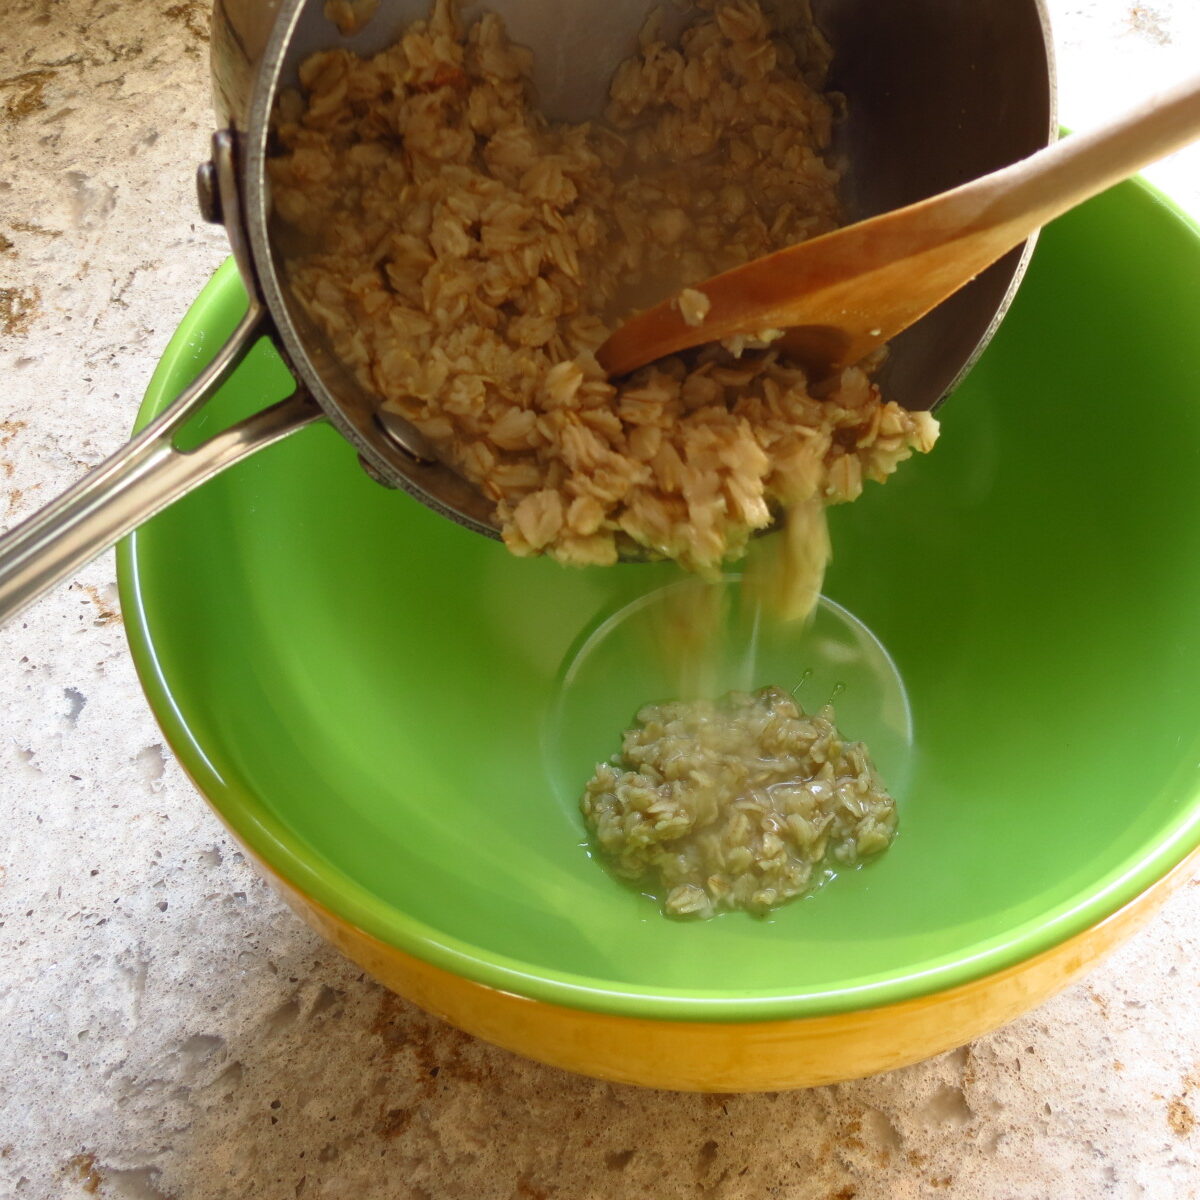 A saucepan of cooked oats poured into a large bowl.